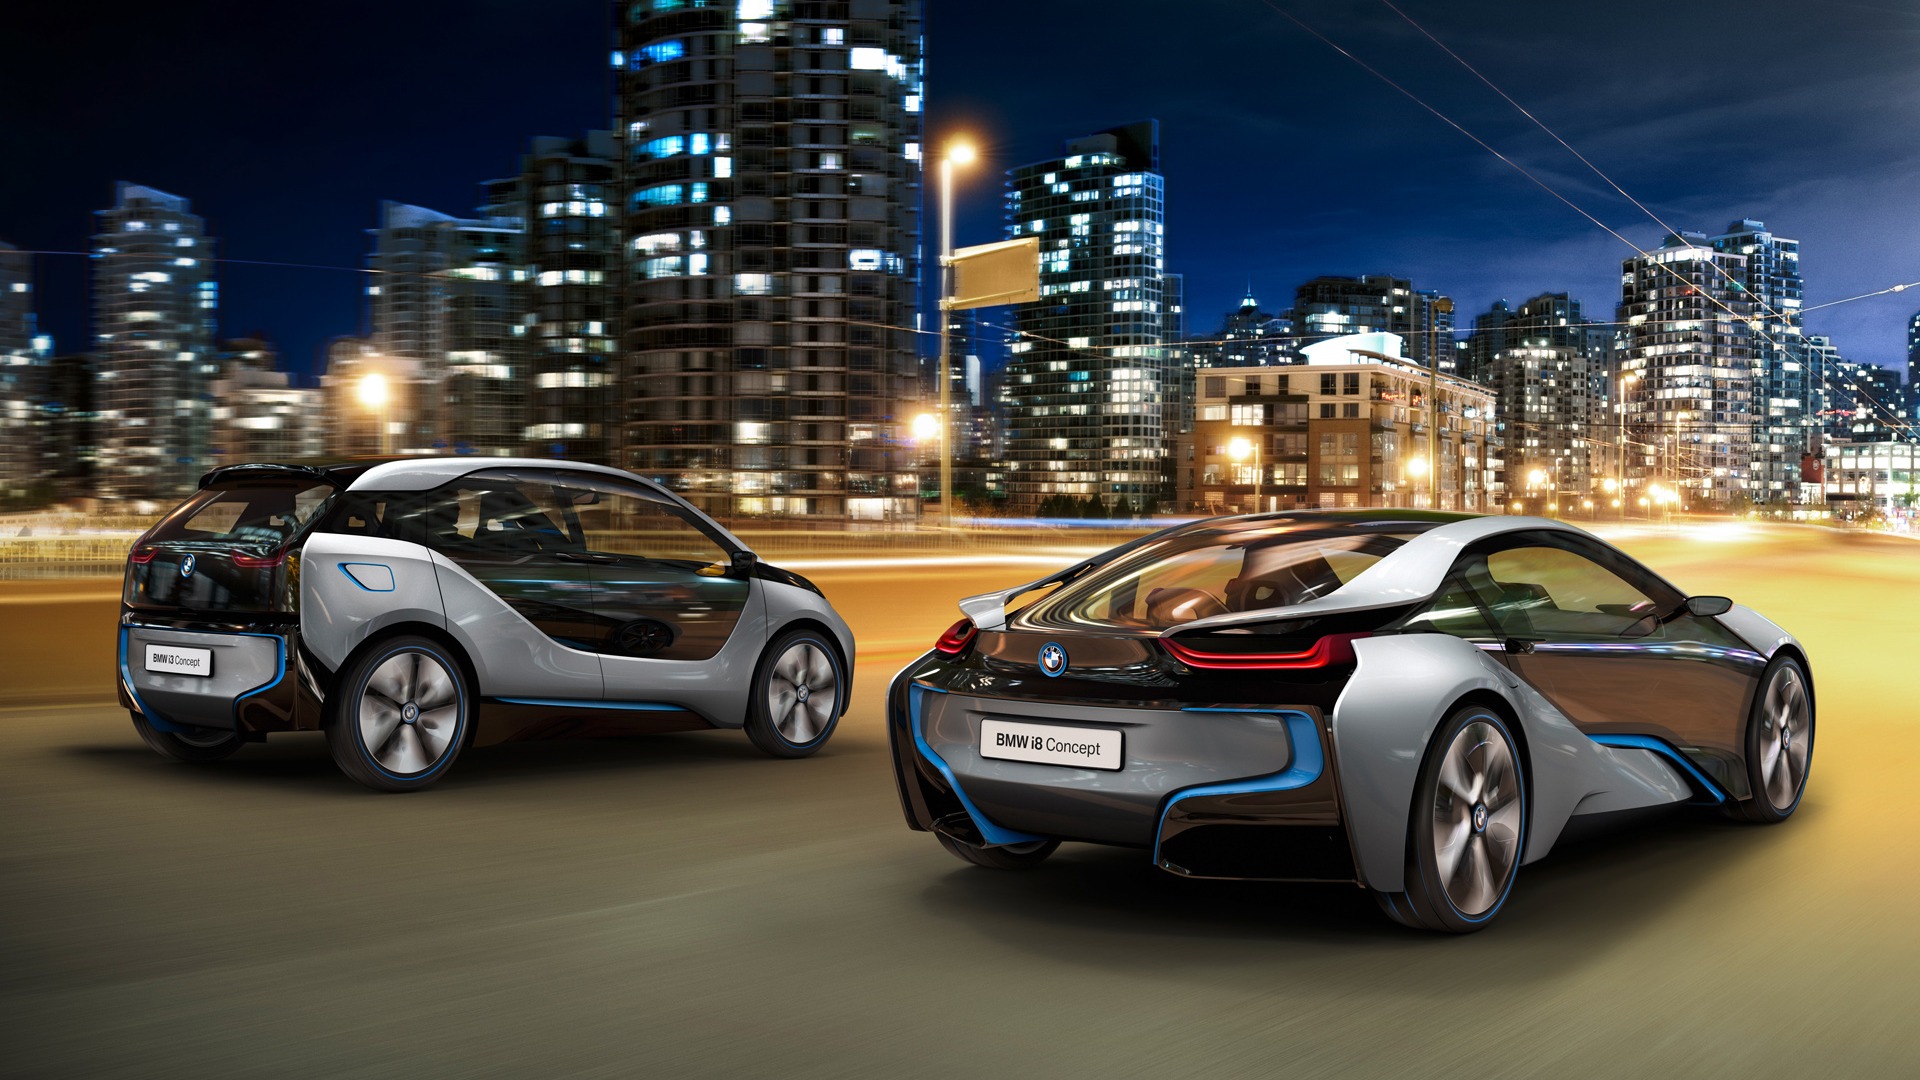 BMW i8 Concept - 2011 HD wallpapers #17 - 1920x1080